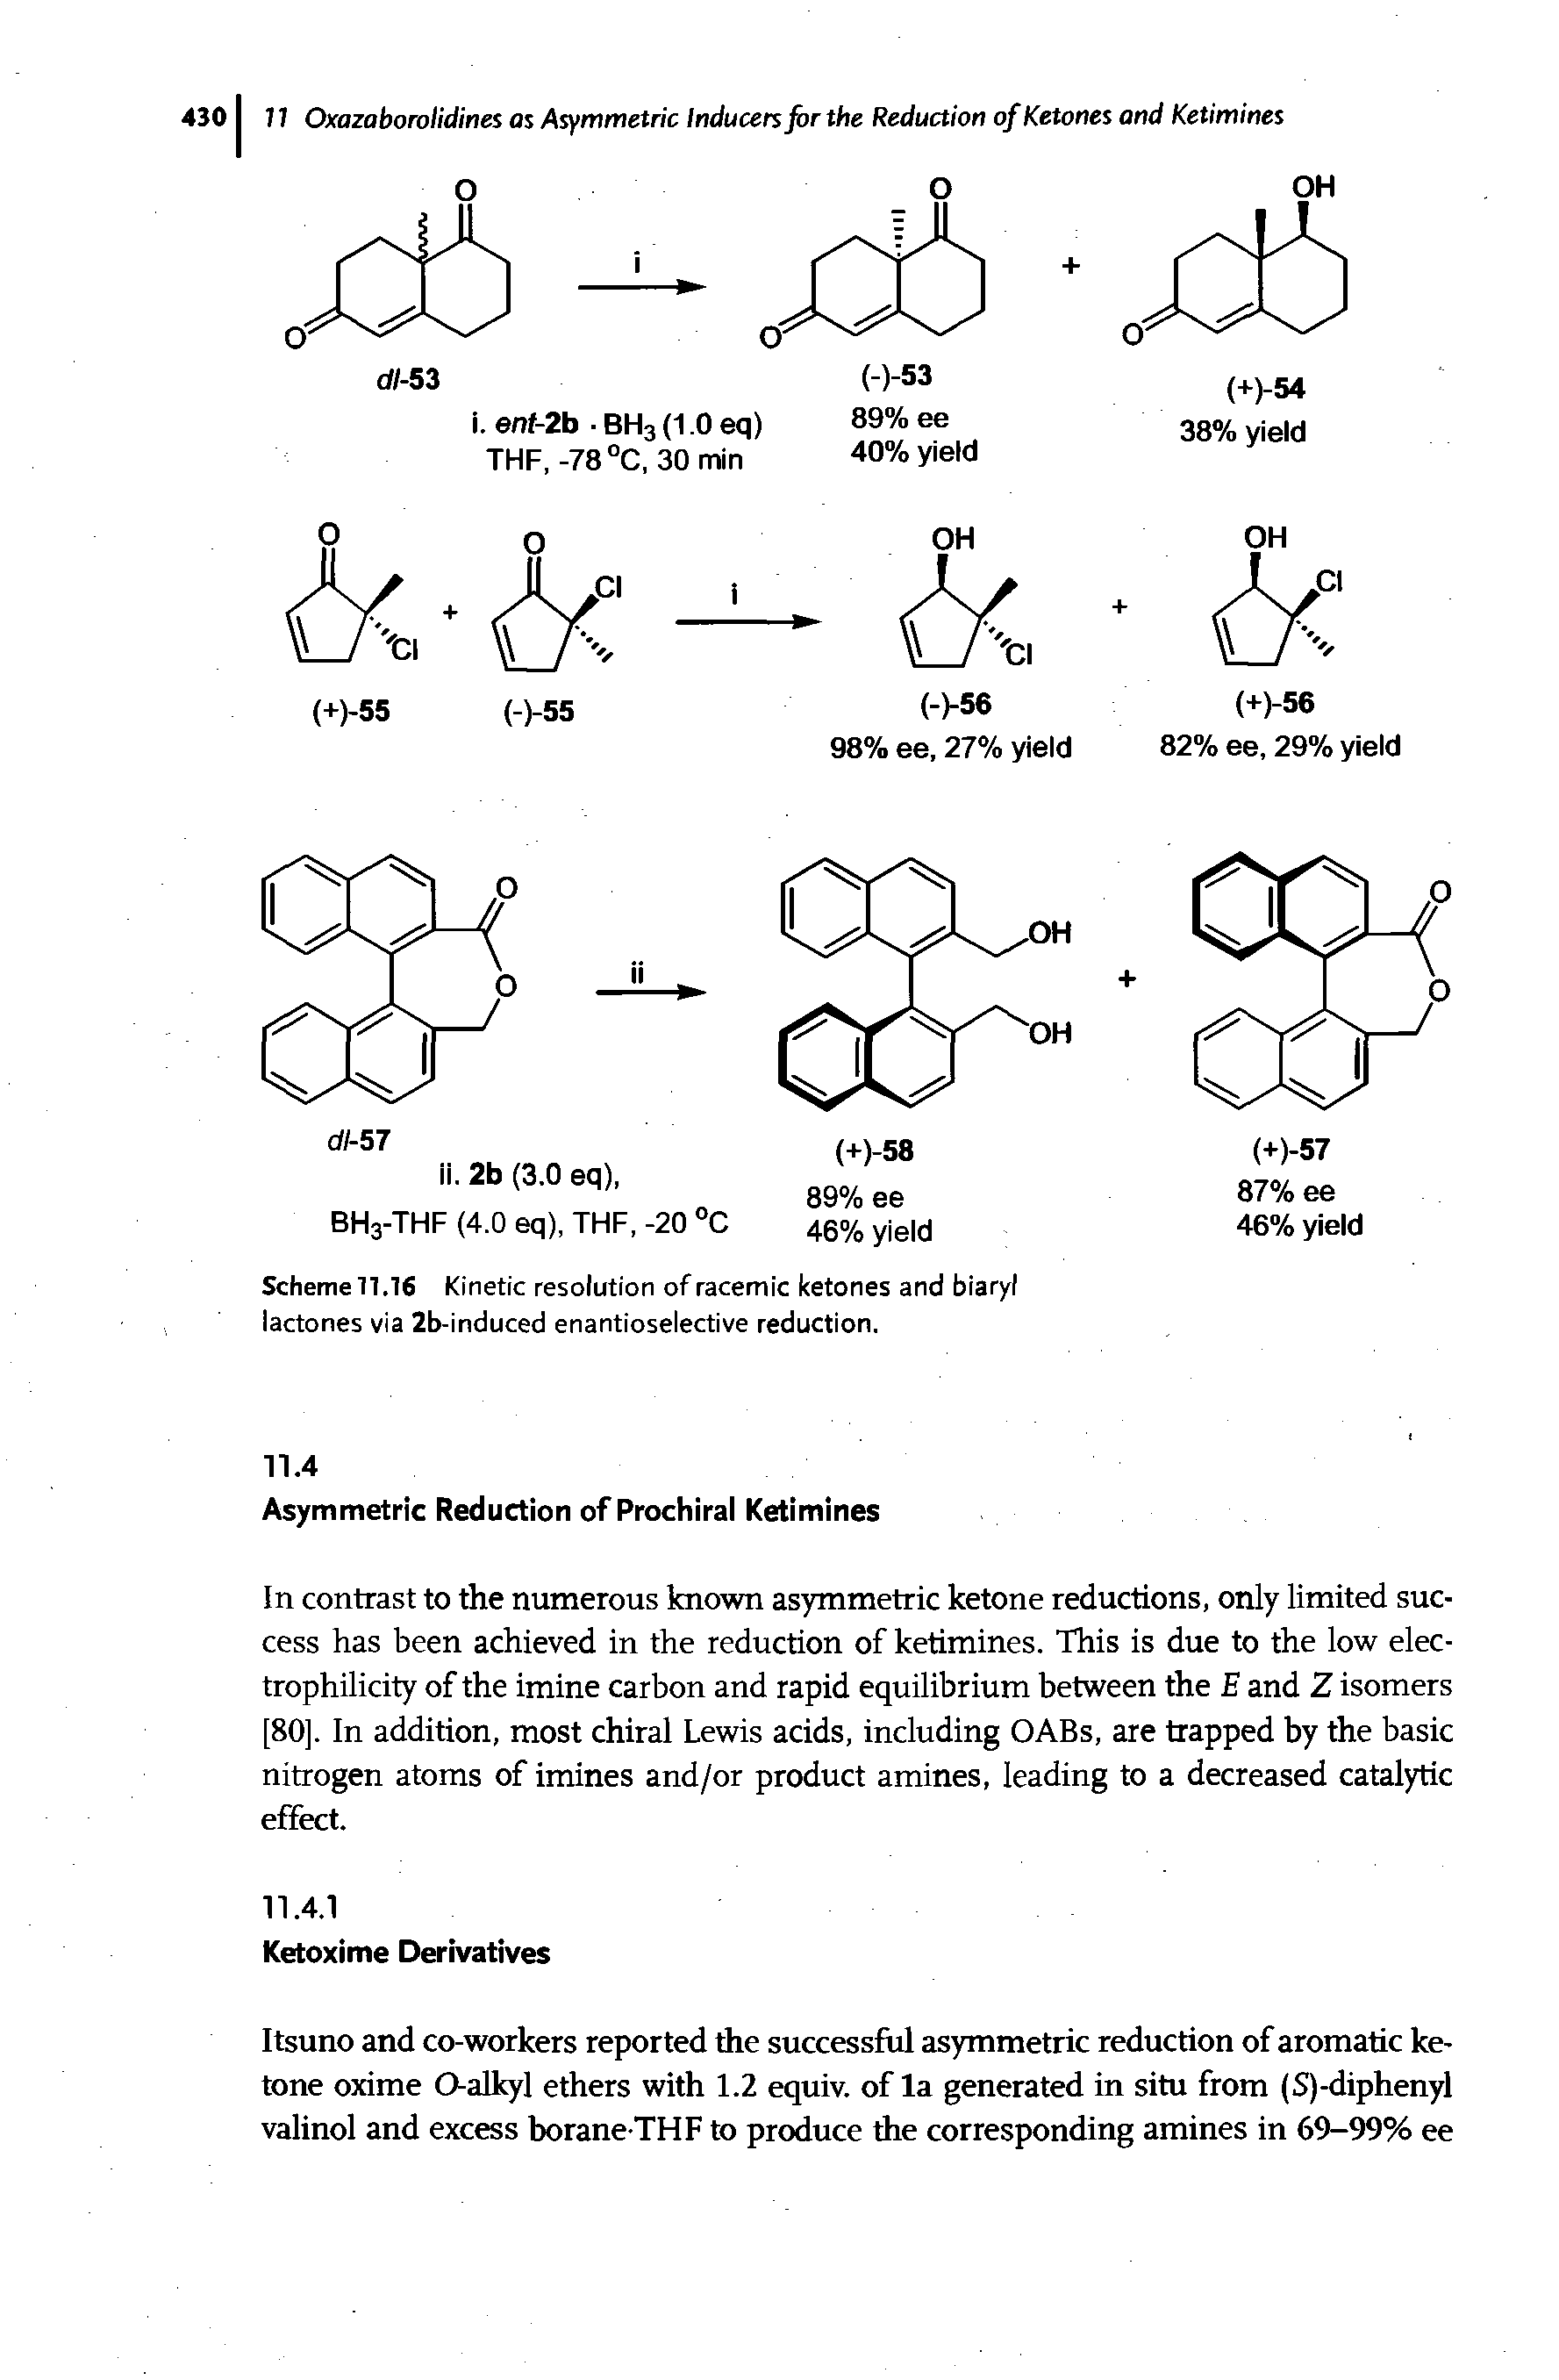 Scheme 17.76 Kinetic resolution of racemic ketones and biaryl lactones via 2b-induced enantioselective reduction.